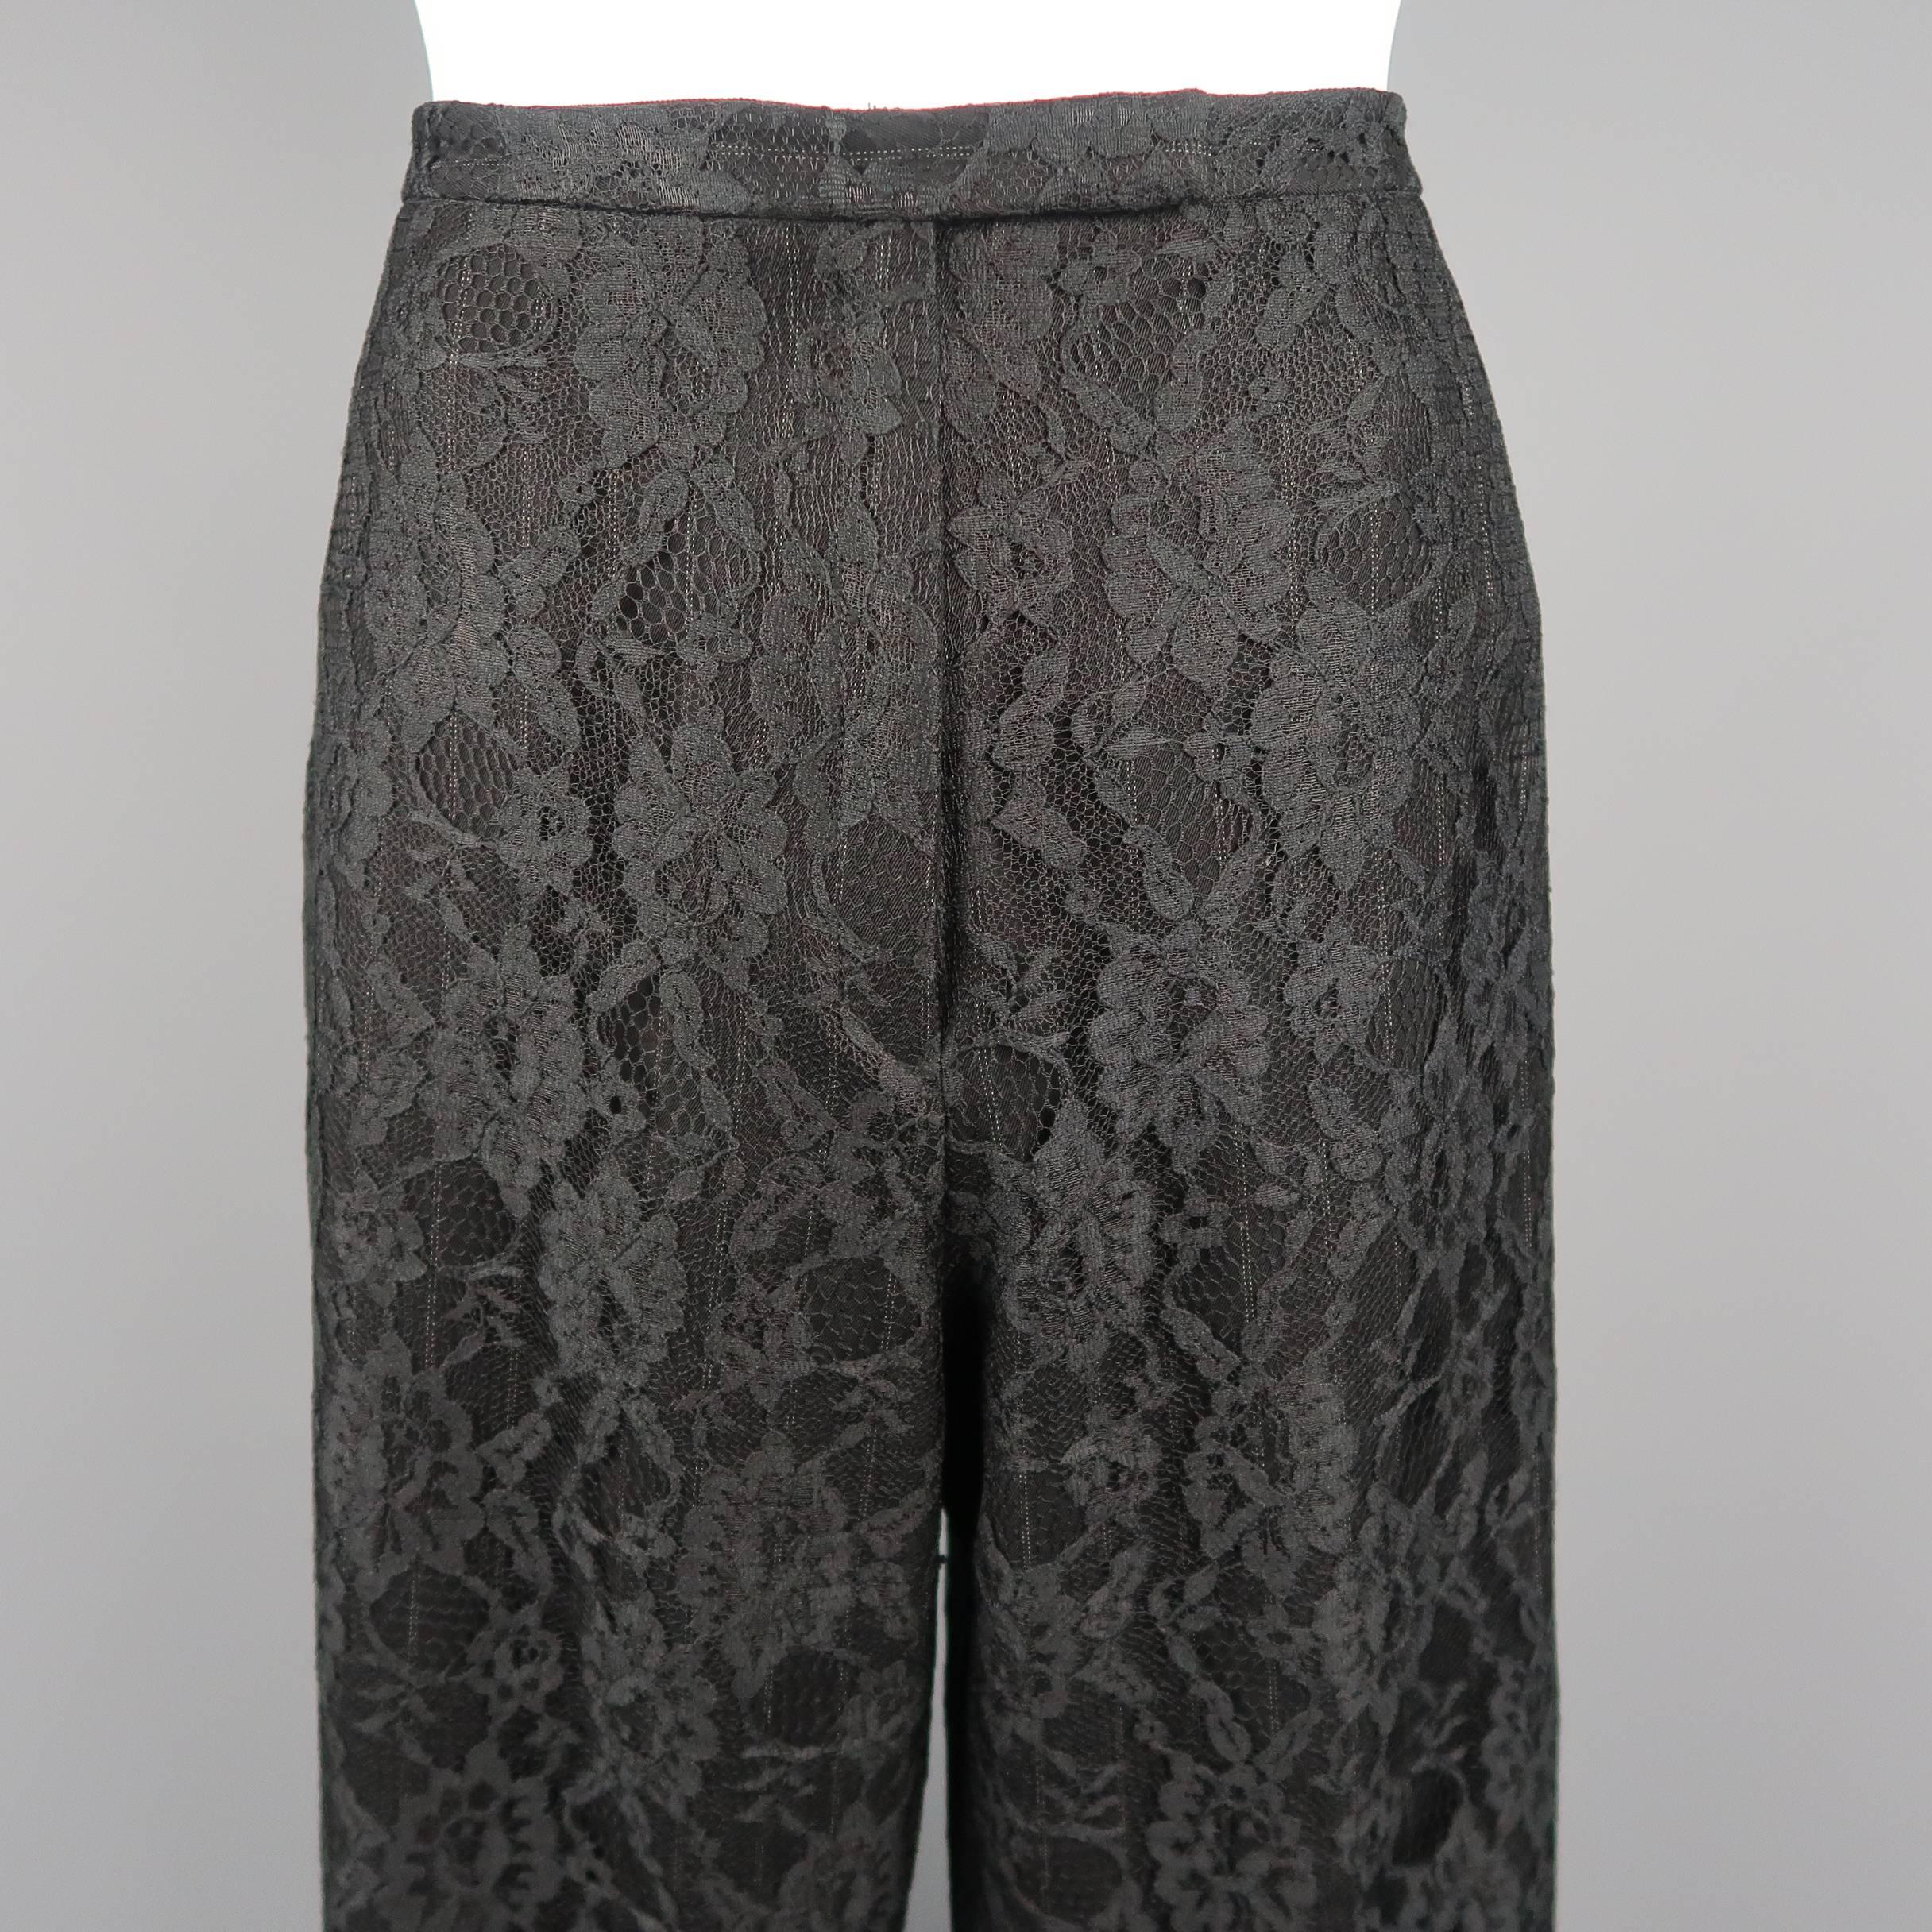 Archive RICHARD TYLER COUTURE high rise dress pants come in a black pinstripe wool blend fabric with floral lace overlay and tapered fit. Made in USA.
 
Excellent Pre-Owned Condition.
Marked: 10
 
Measurements:
 
Waist: 30 in.
Rise: 11 in.
Inseam: